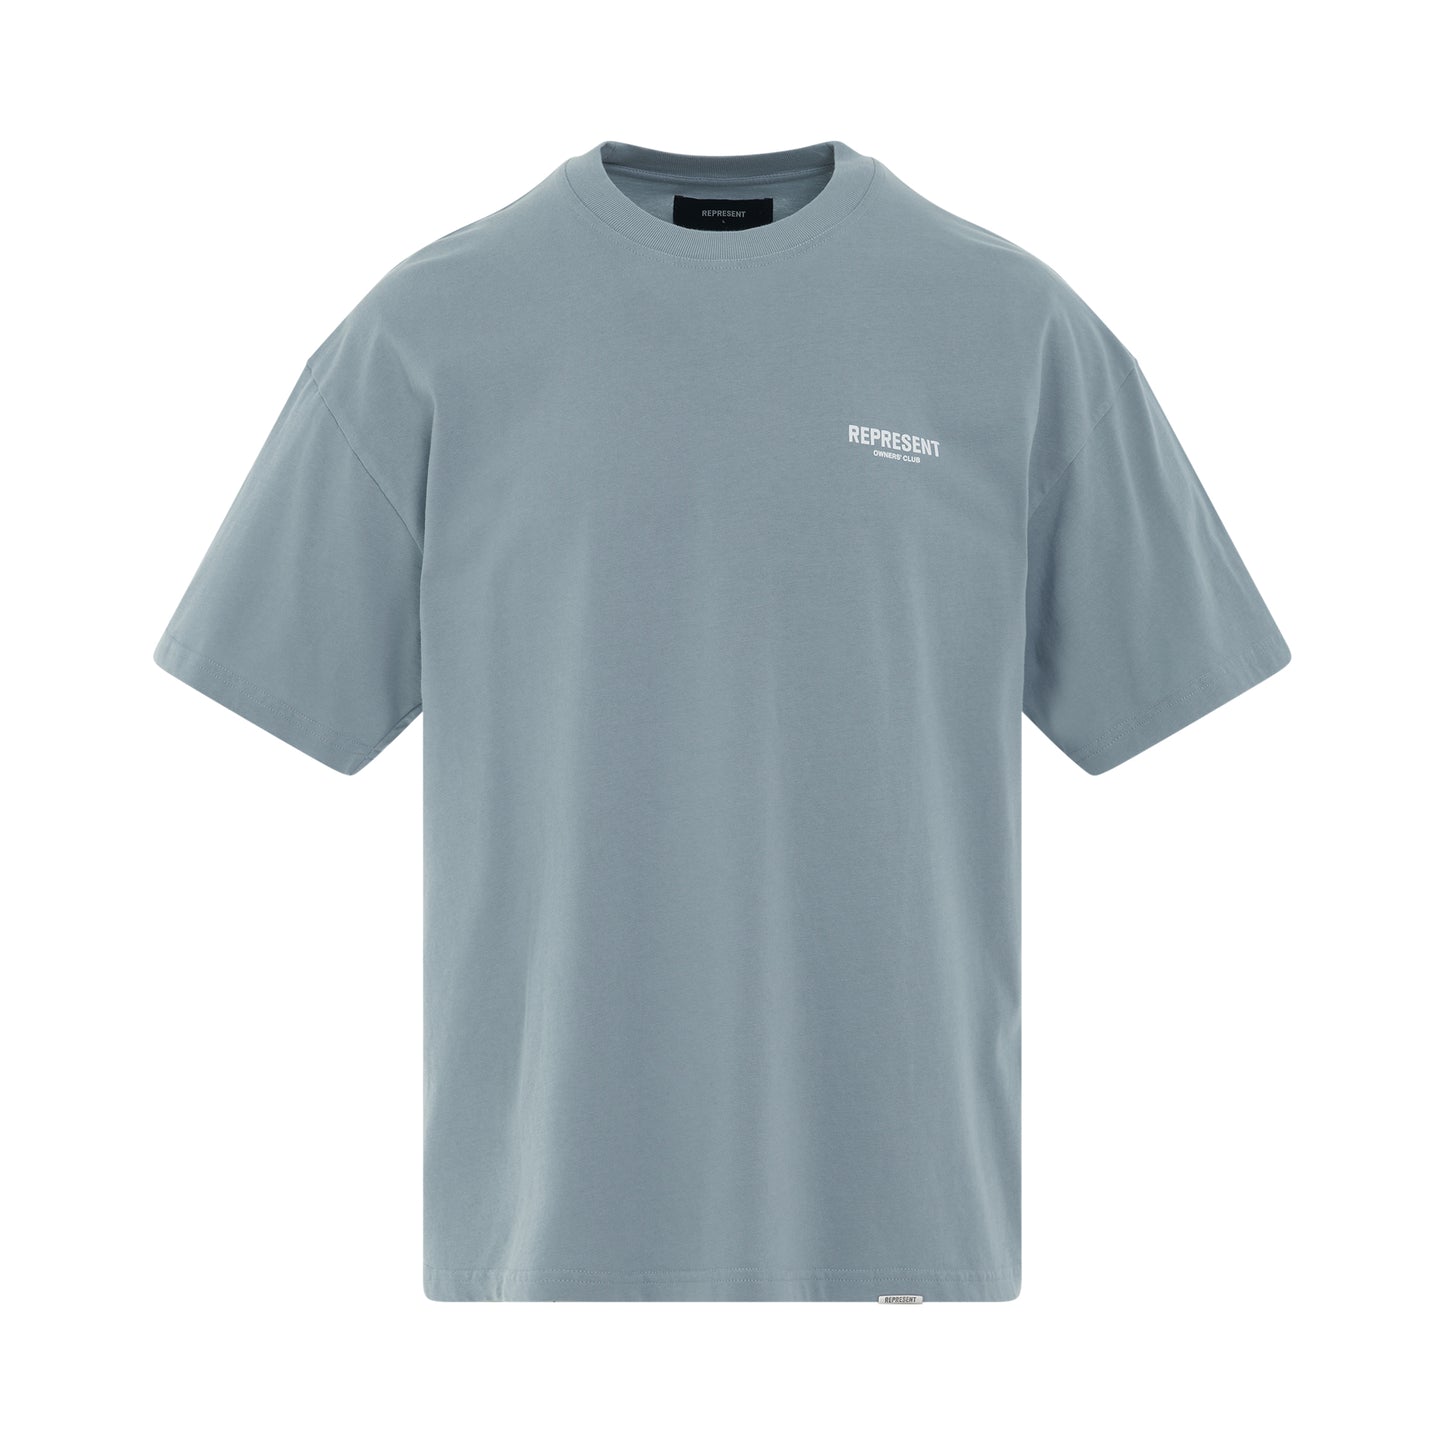 Represent Owners Club T-Shirt in Powder Blue